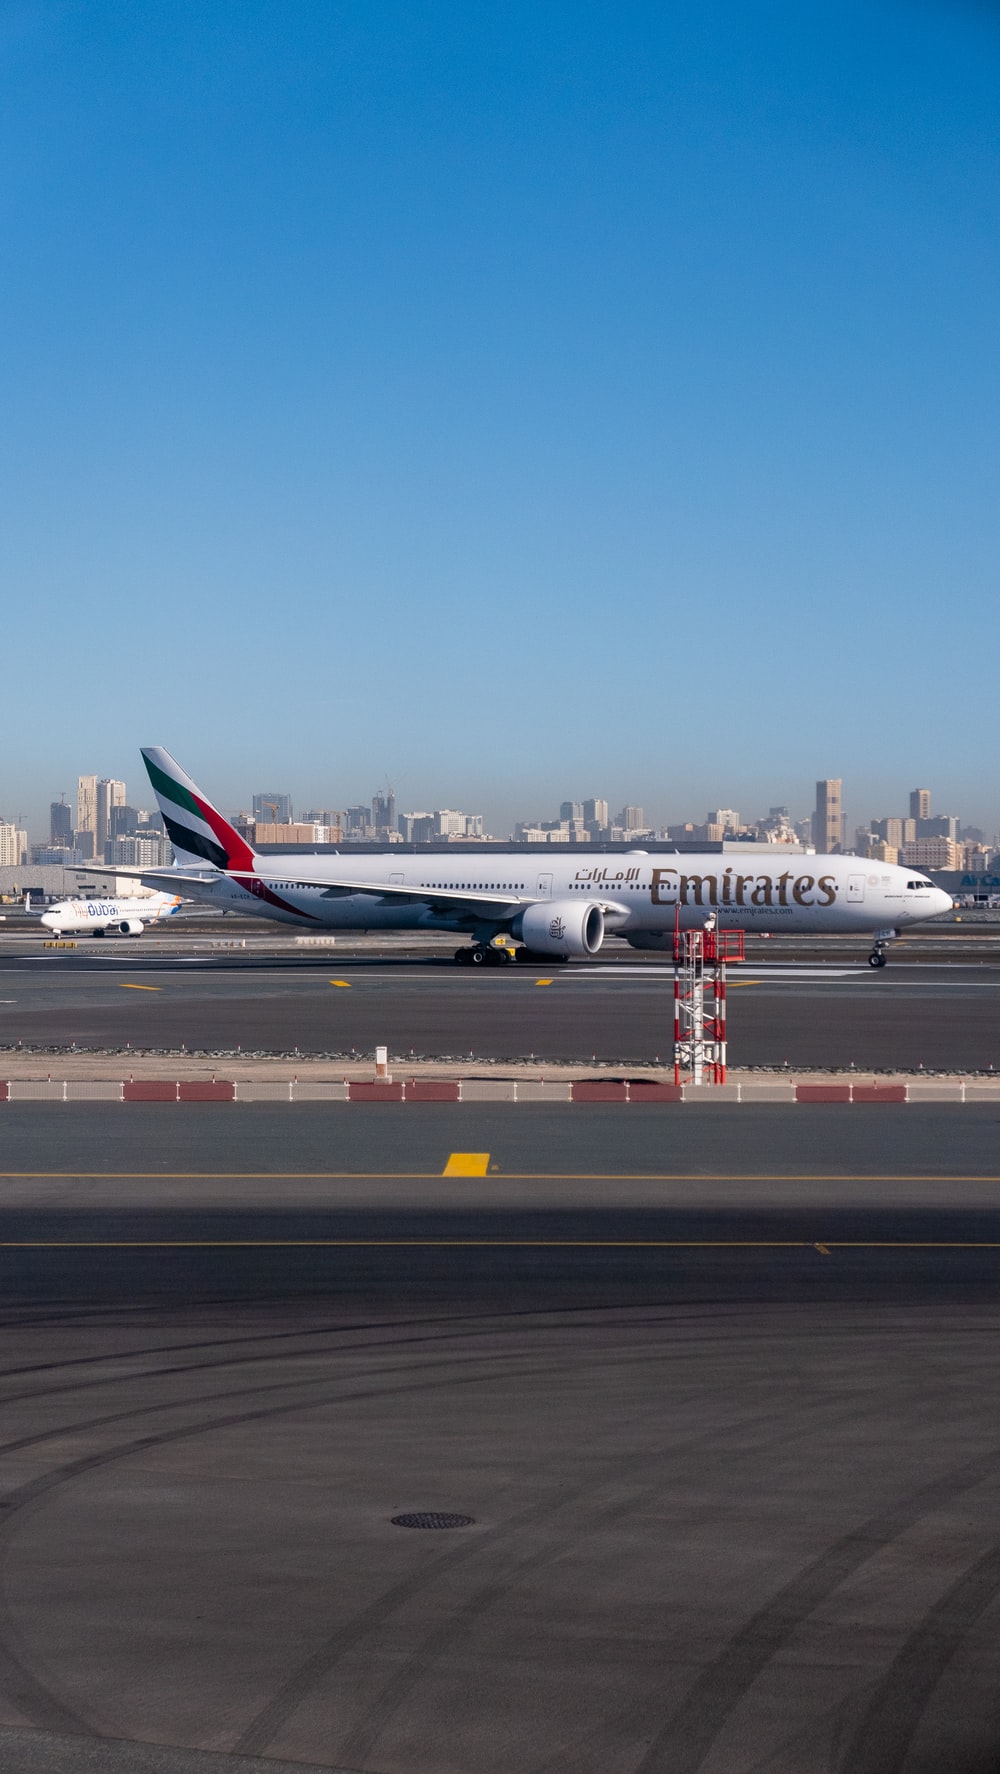 Emirates Airline Picture. Download Free Image